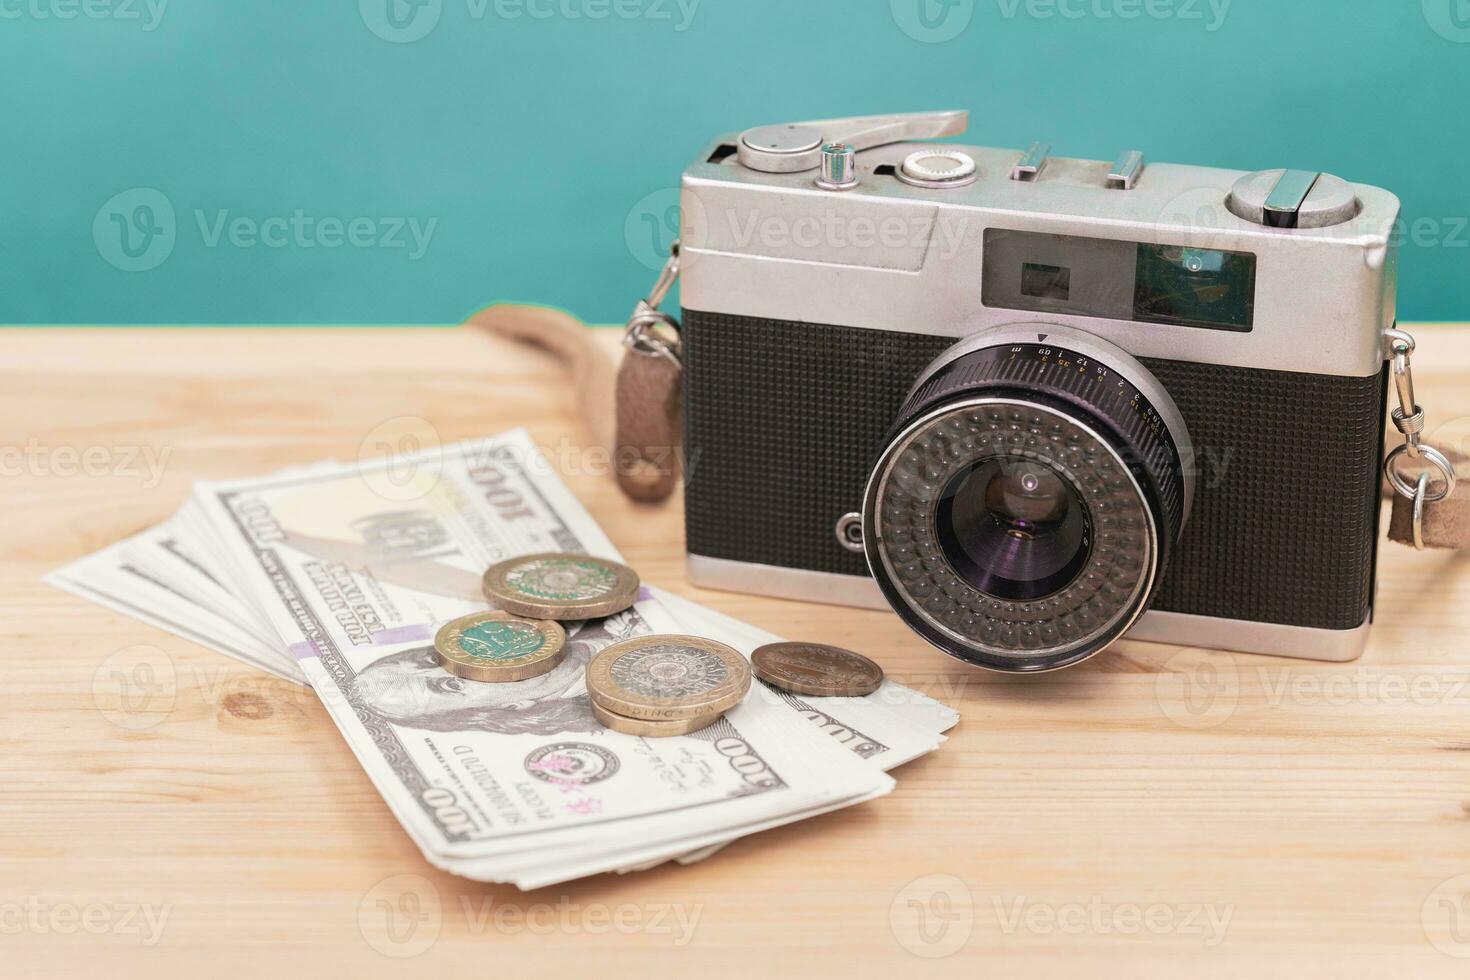 vintage camera with fake money for sell photograph or stock image photographer business career concept photo